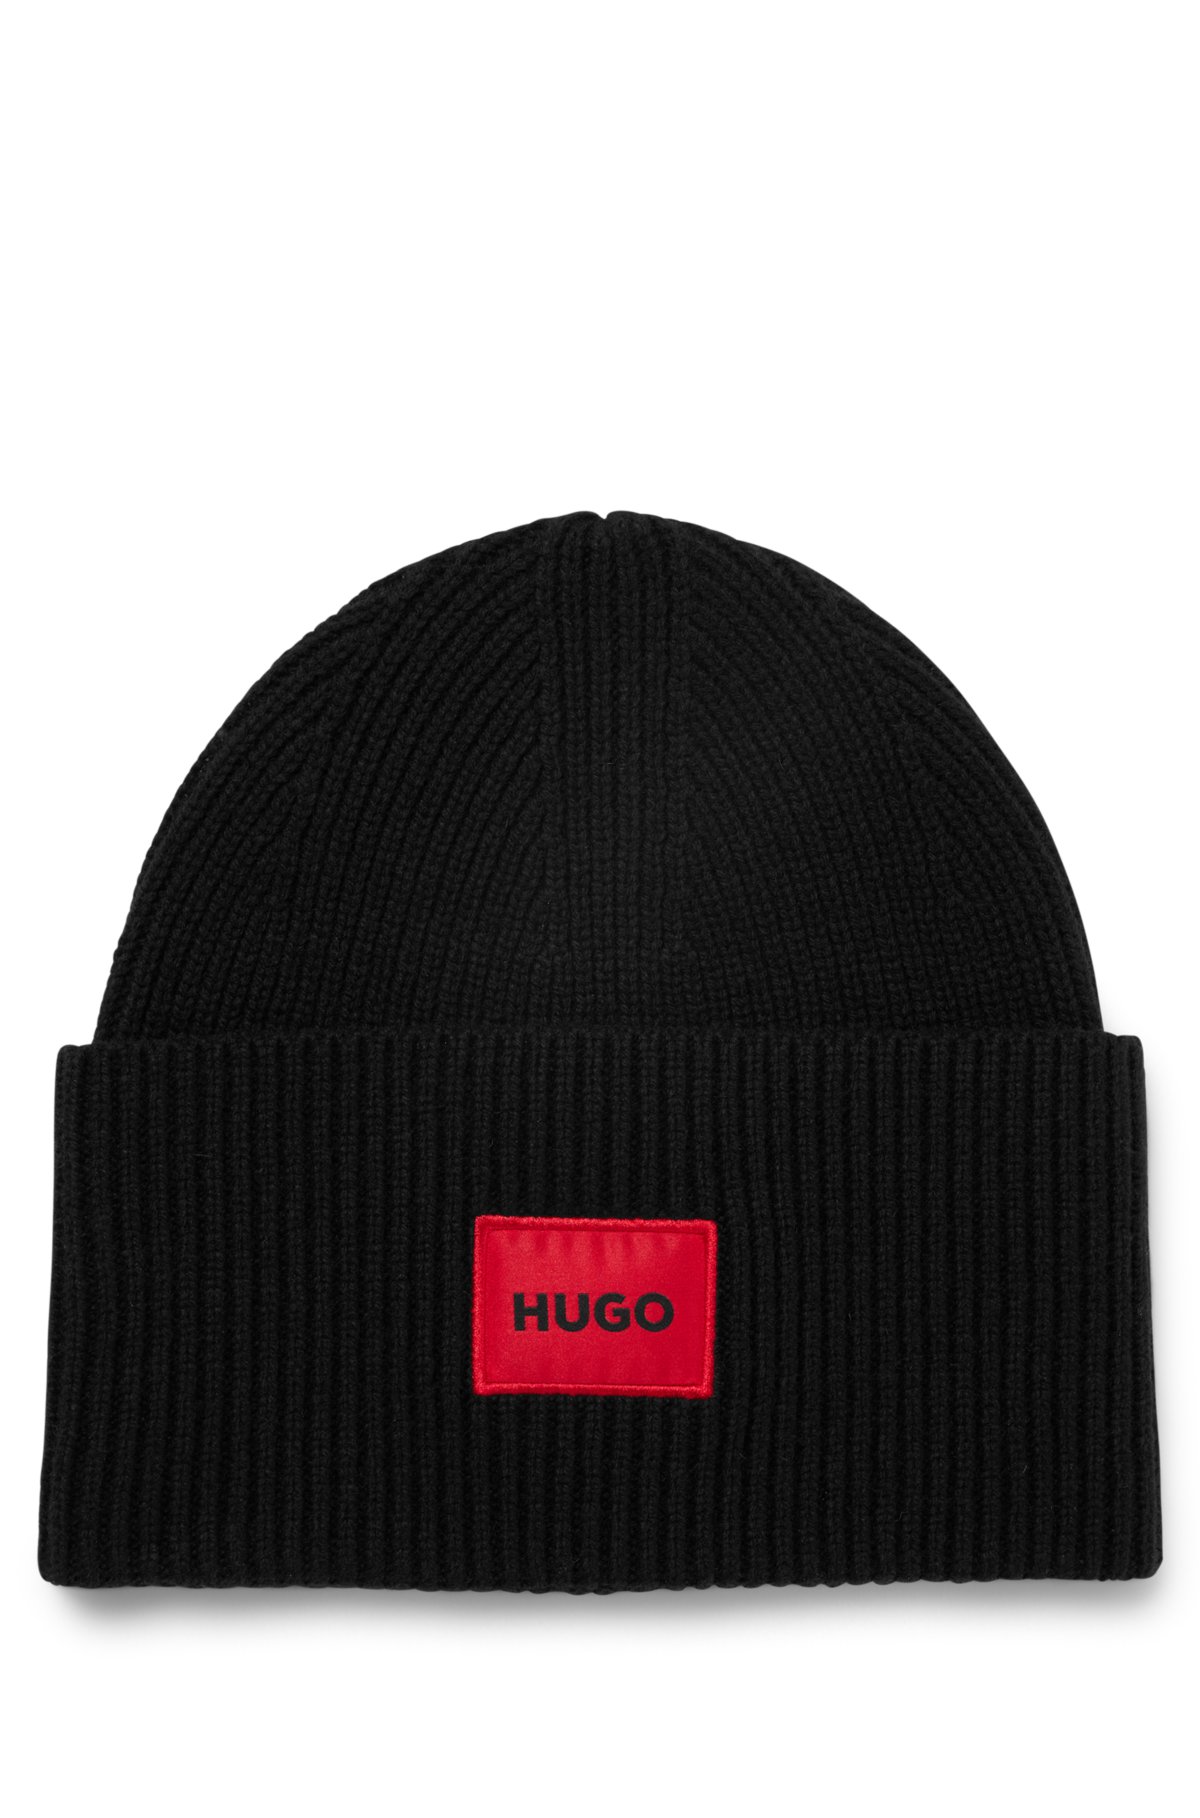 - logo hat red HUGO with Wool-blend label beanie